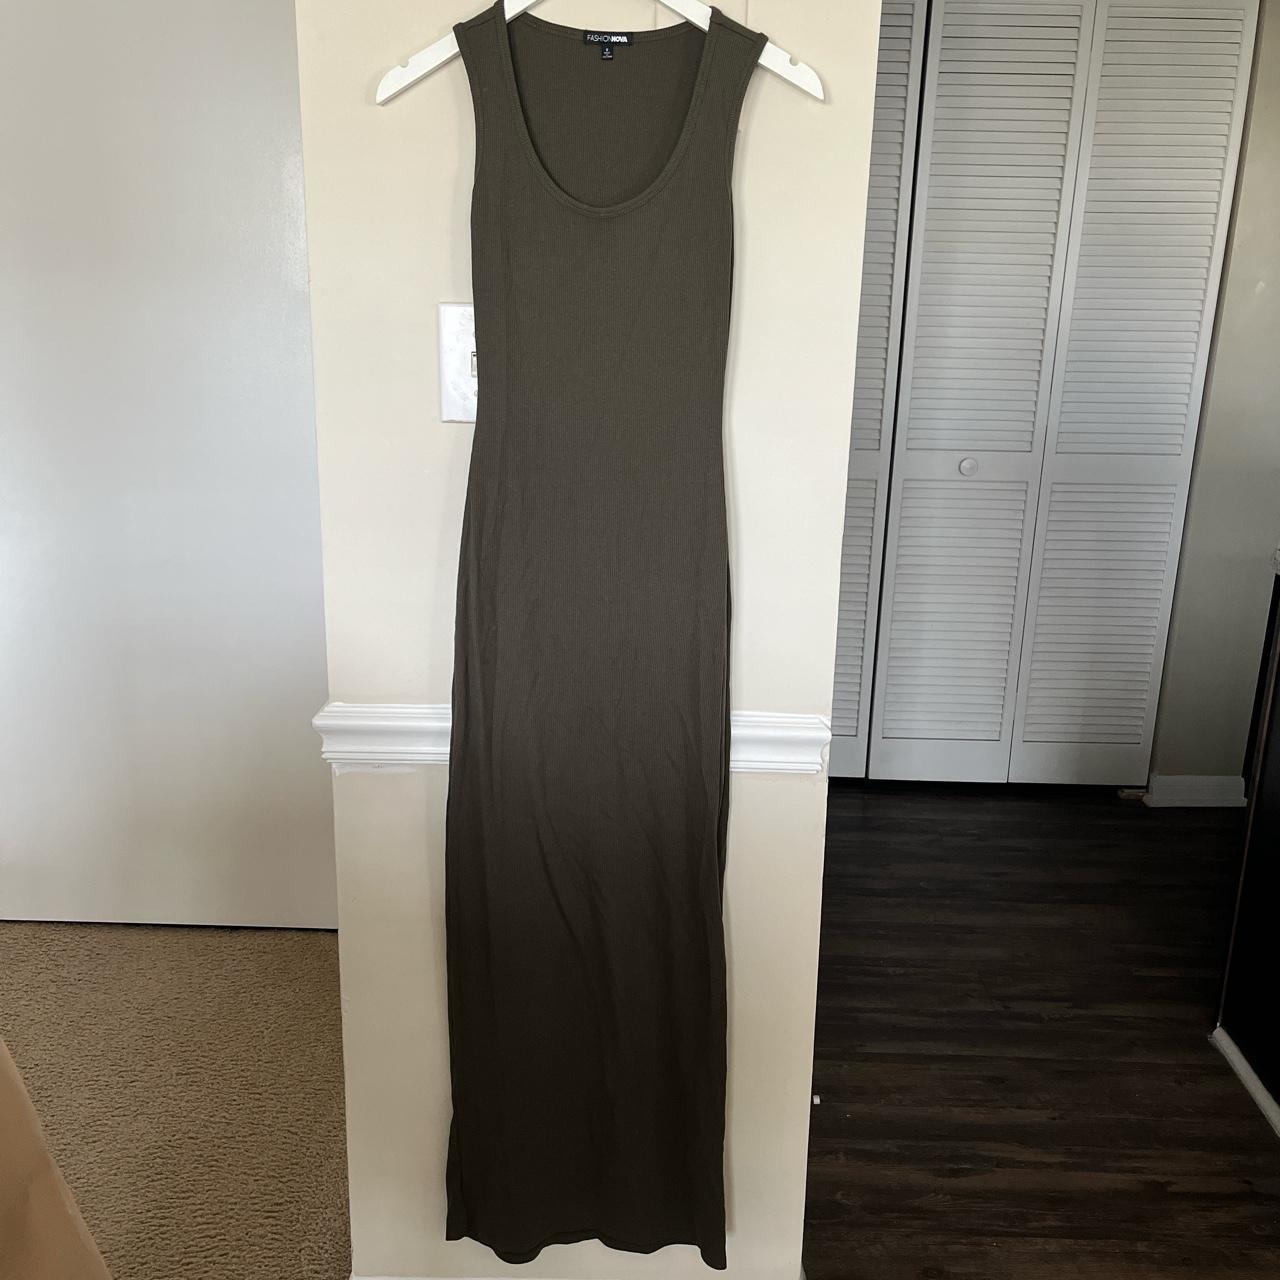 Small Olive Green Cotton Blend Maxi Dress with Stretch - Depop